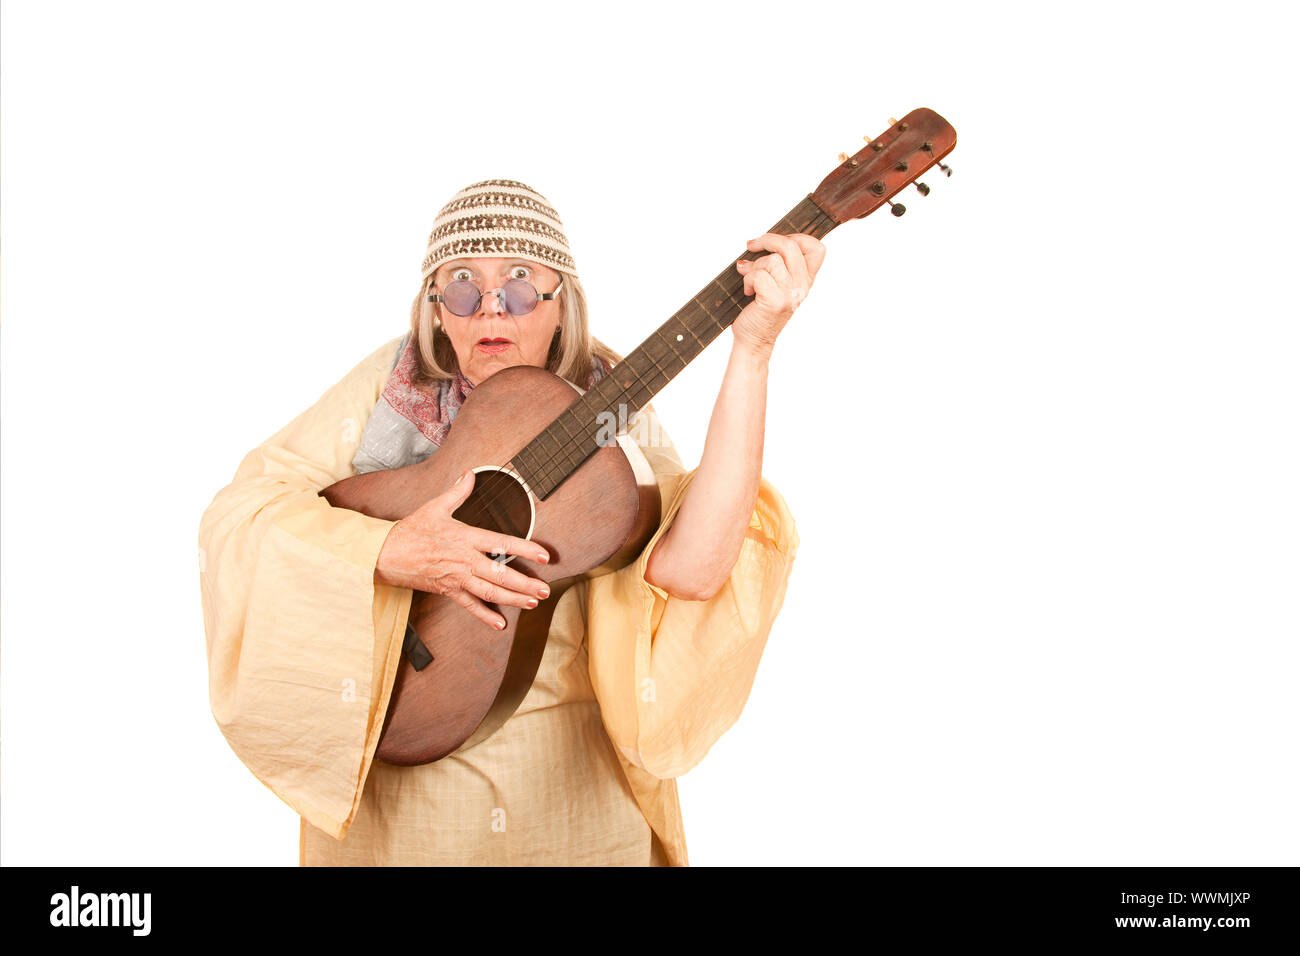 New Age Music Hippie High Resolution Stock Photography and Images - Alamy